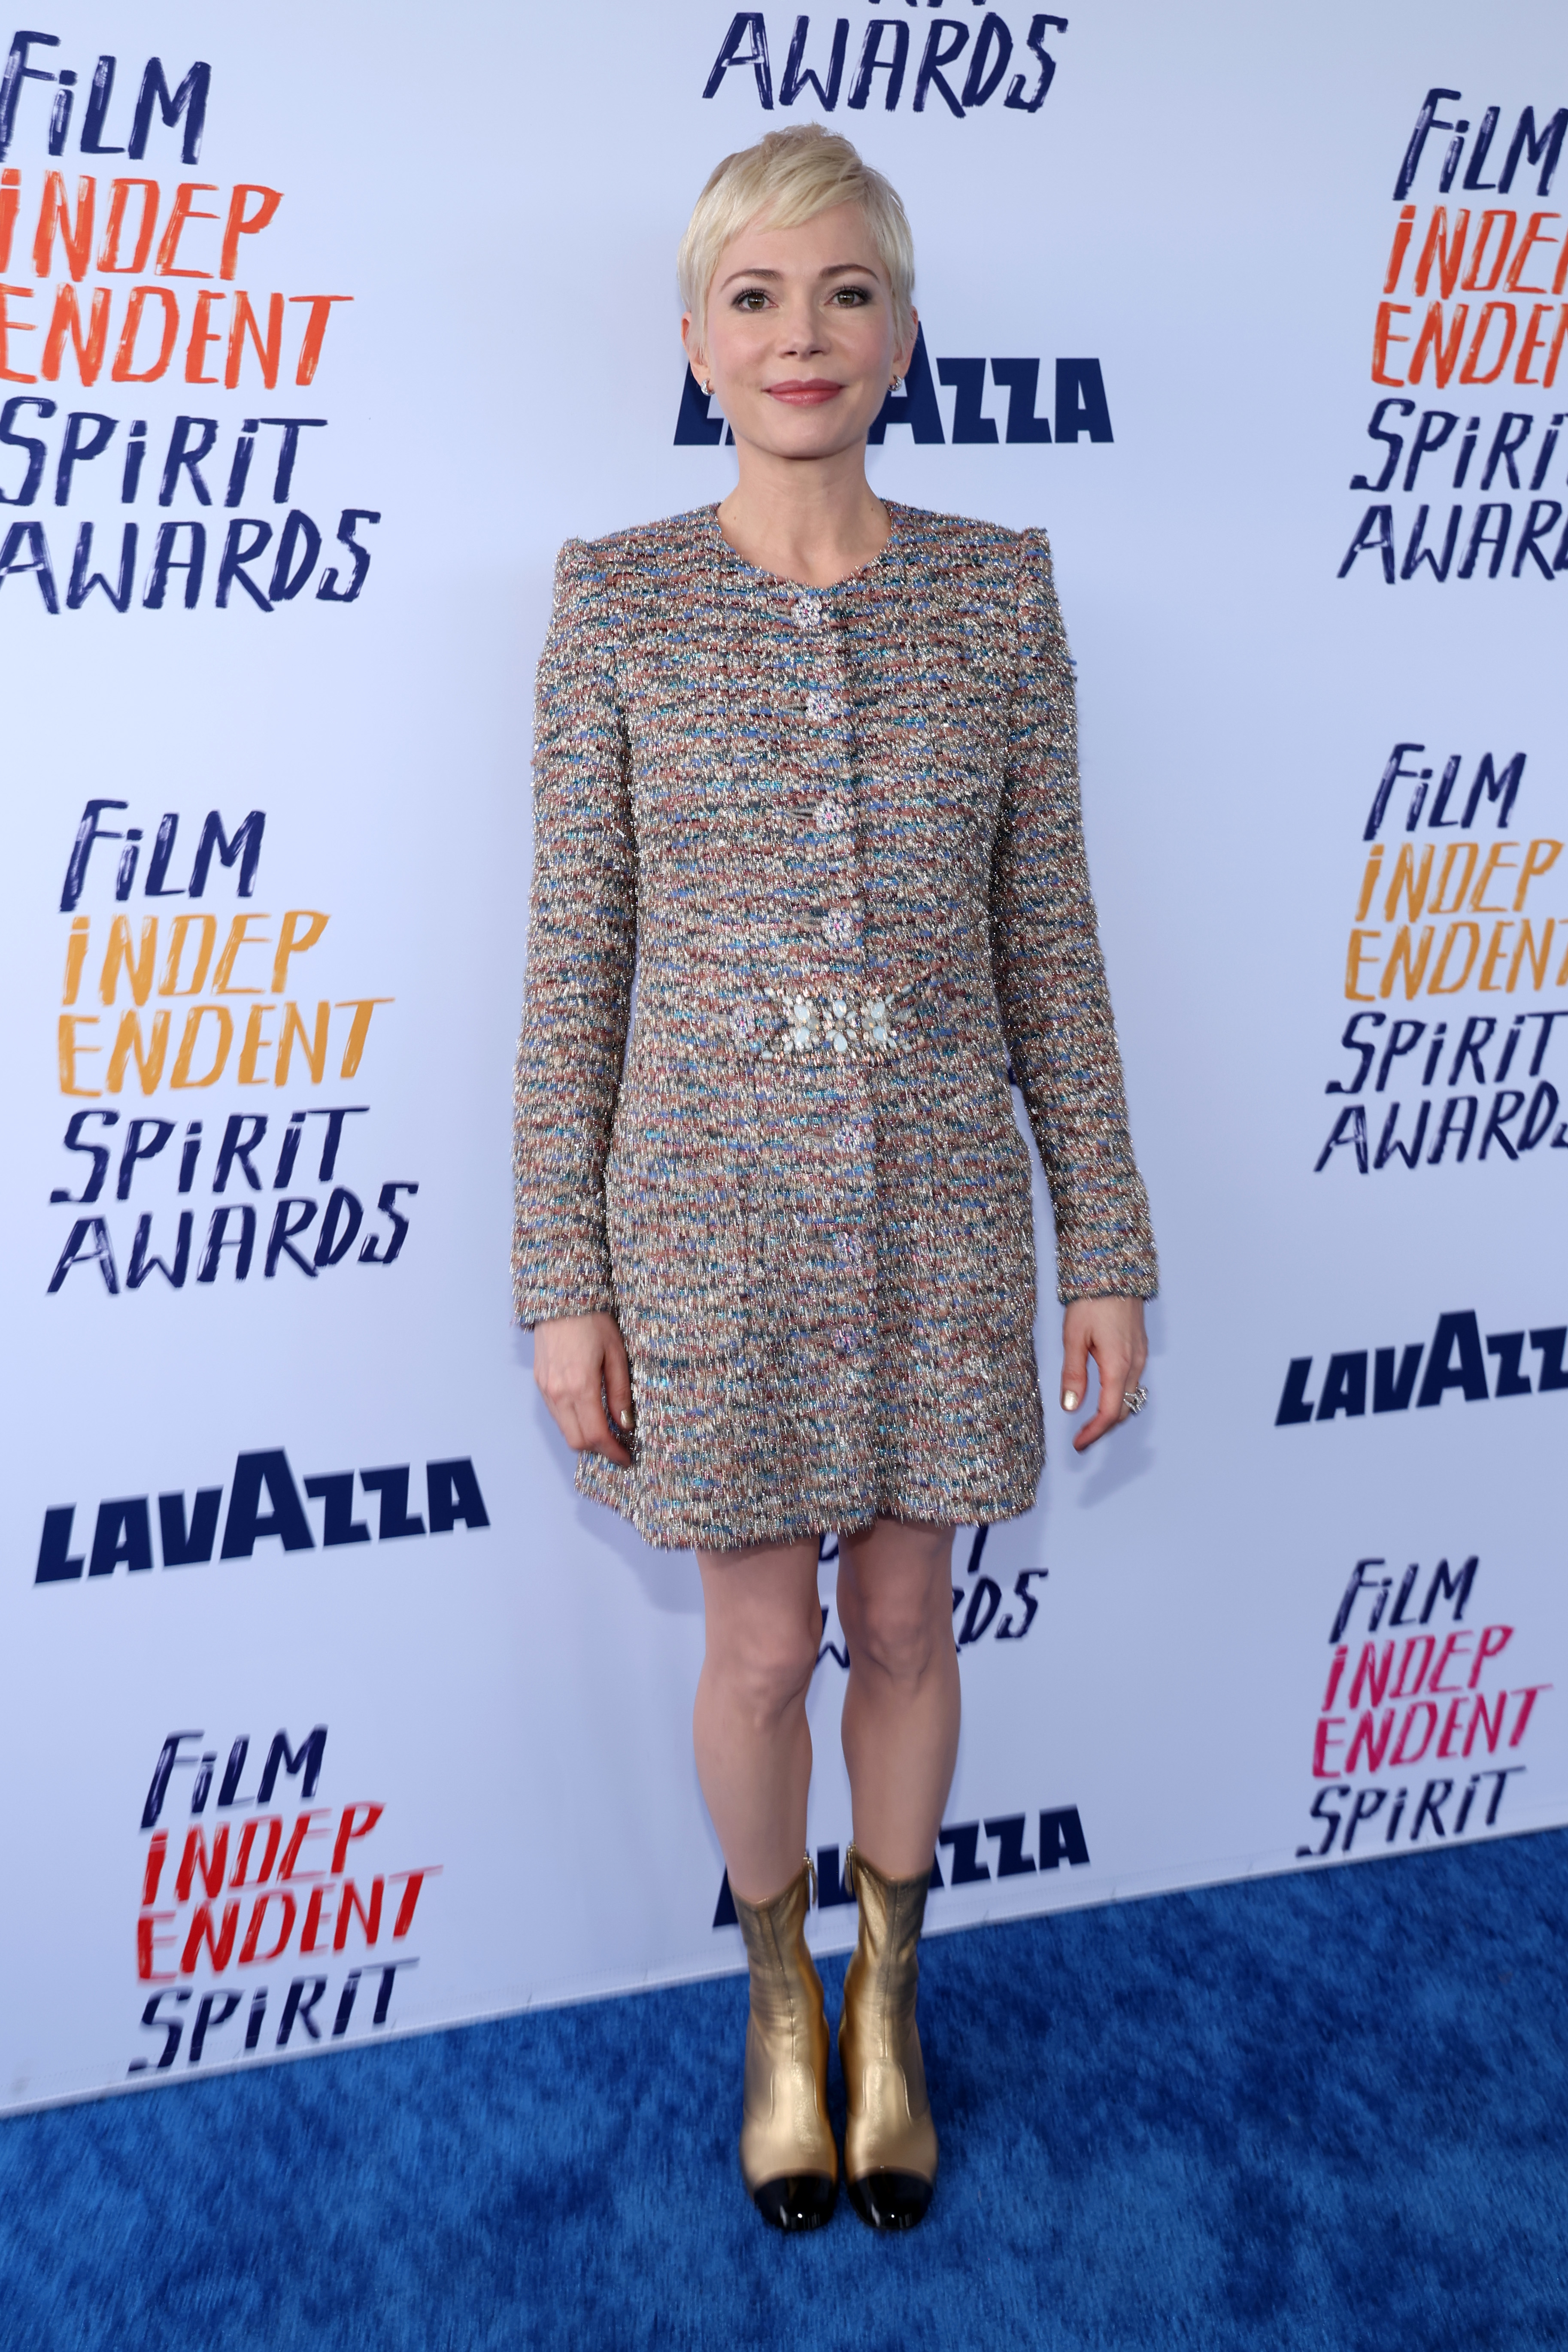 Michelle in a tweed jacket dress and metallic boots at the Film Independent Spirit Awards